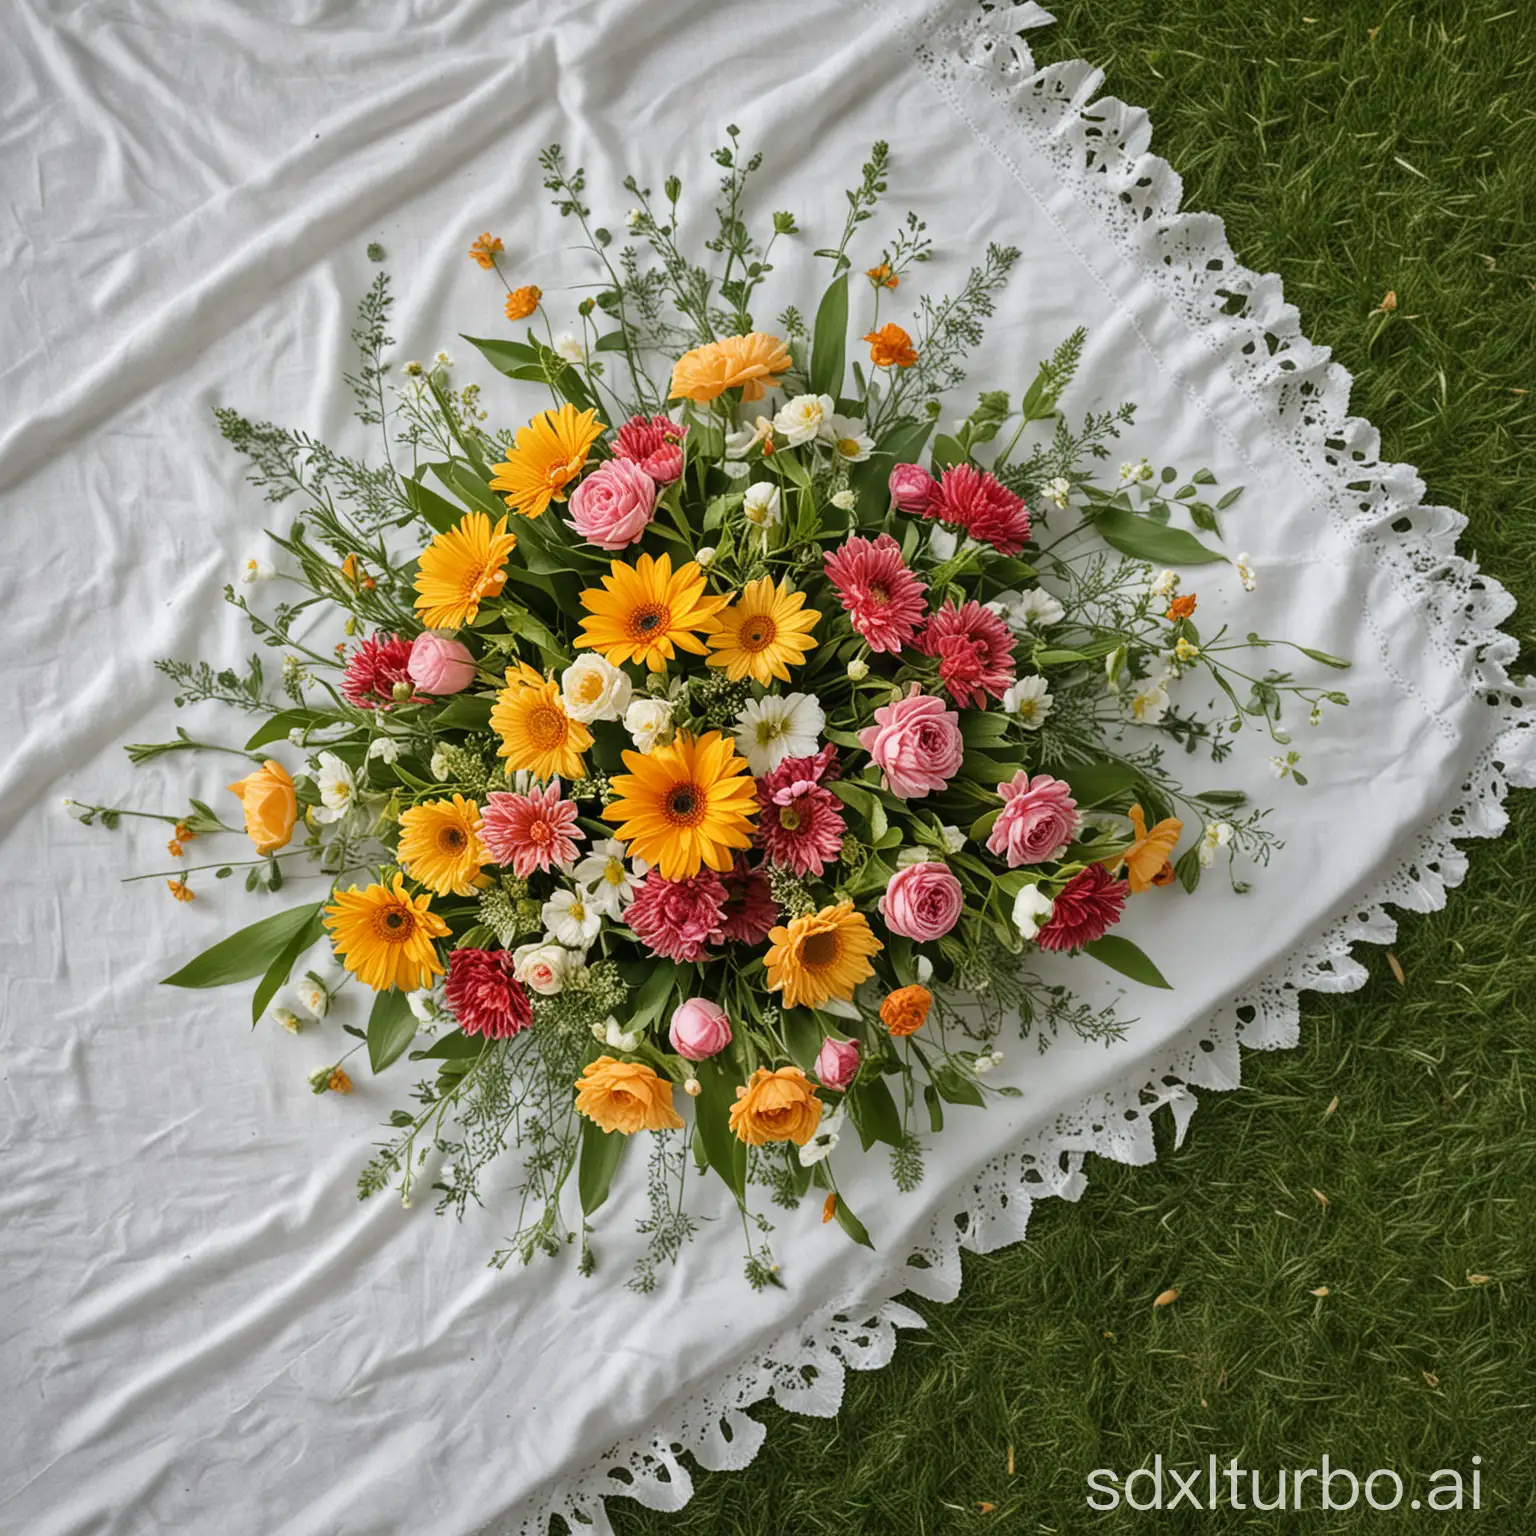 Exquisite-Floral-Arrangement-on-White-Tablecloth-Amidst-Lush-Green-Lawn